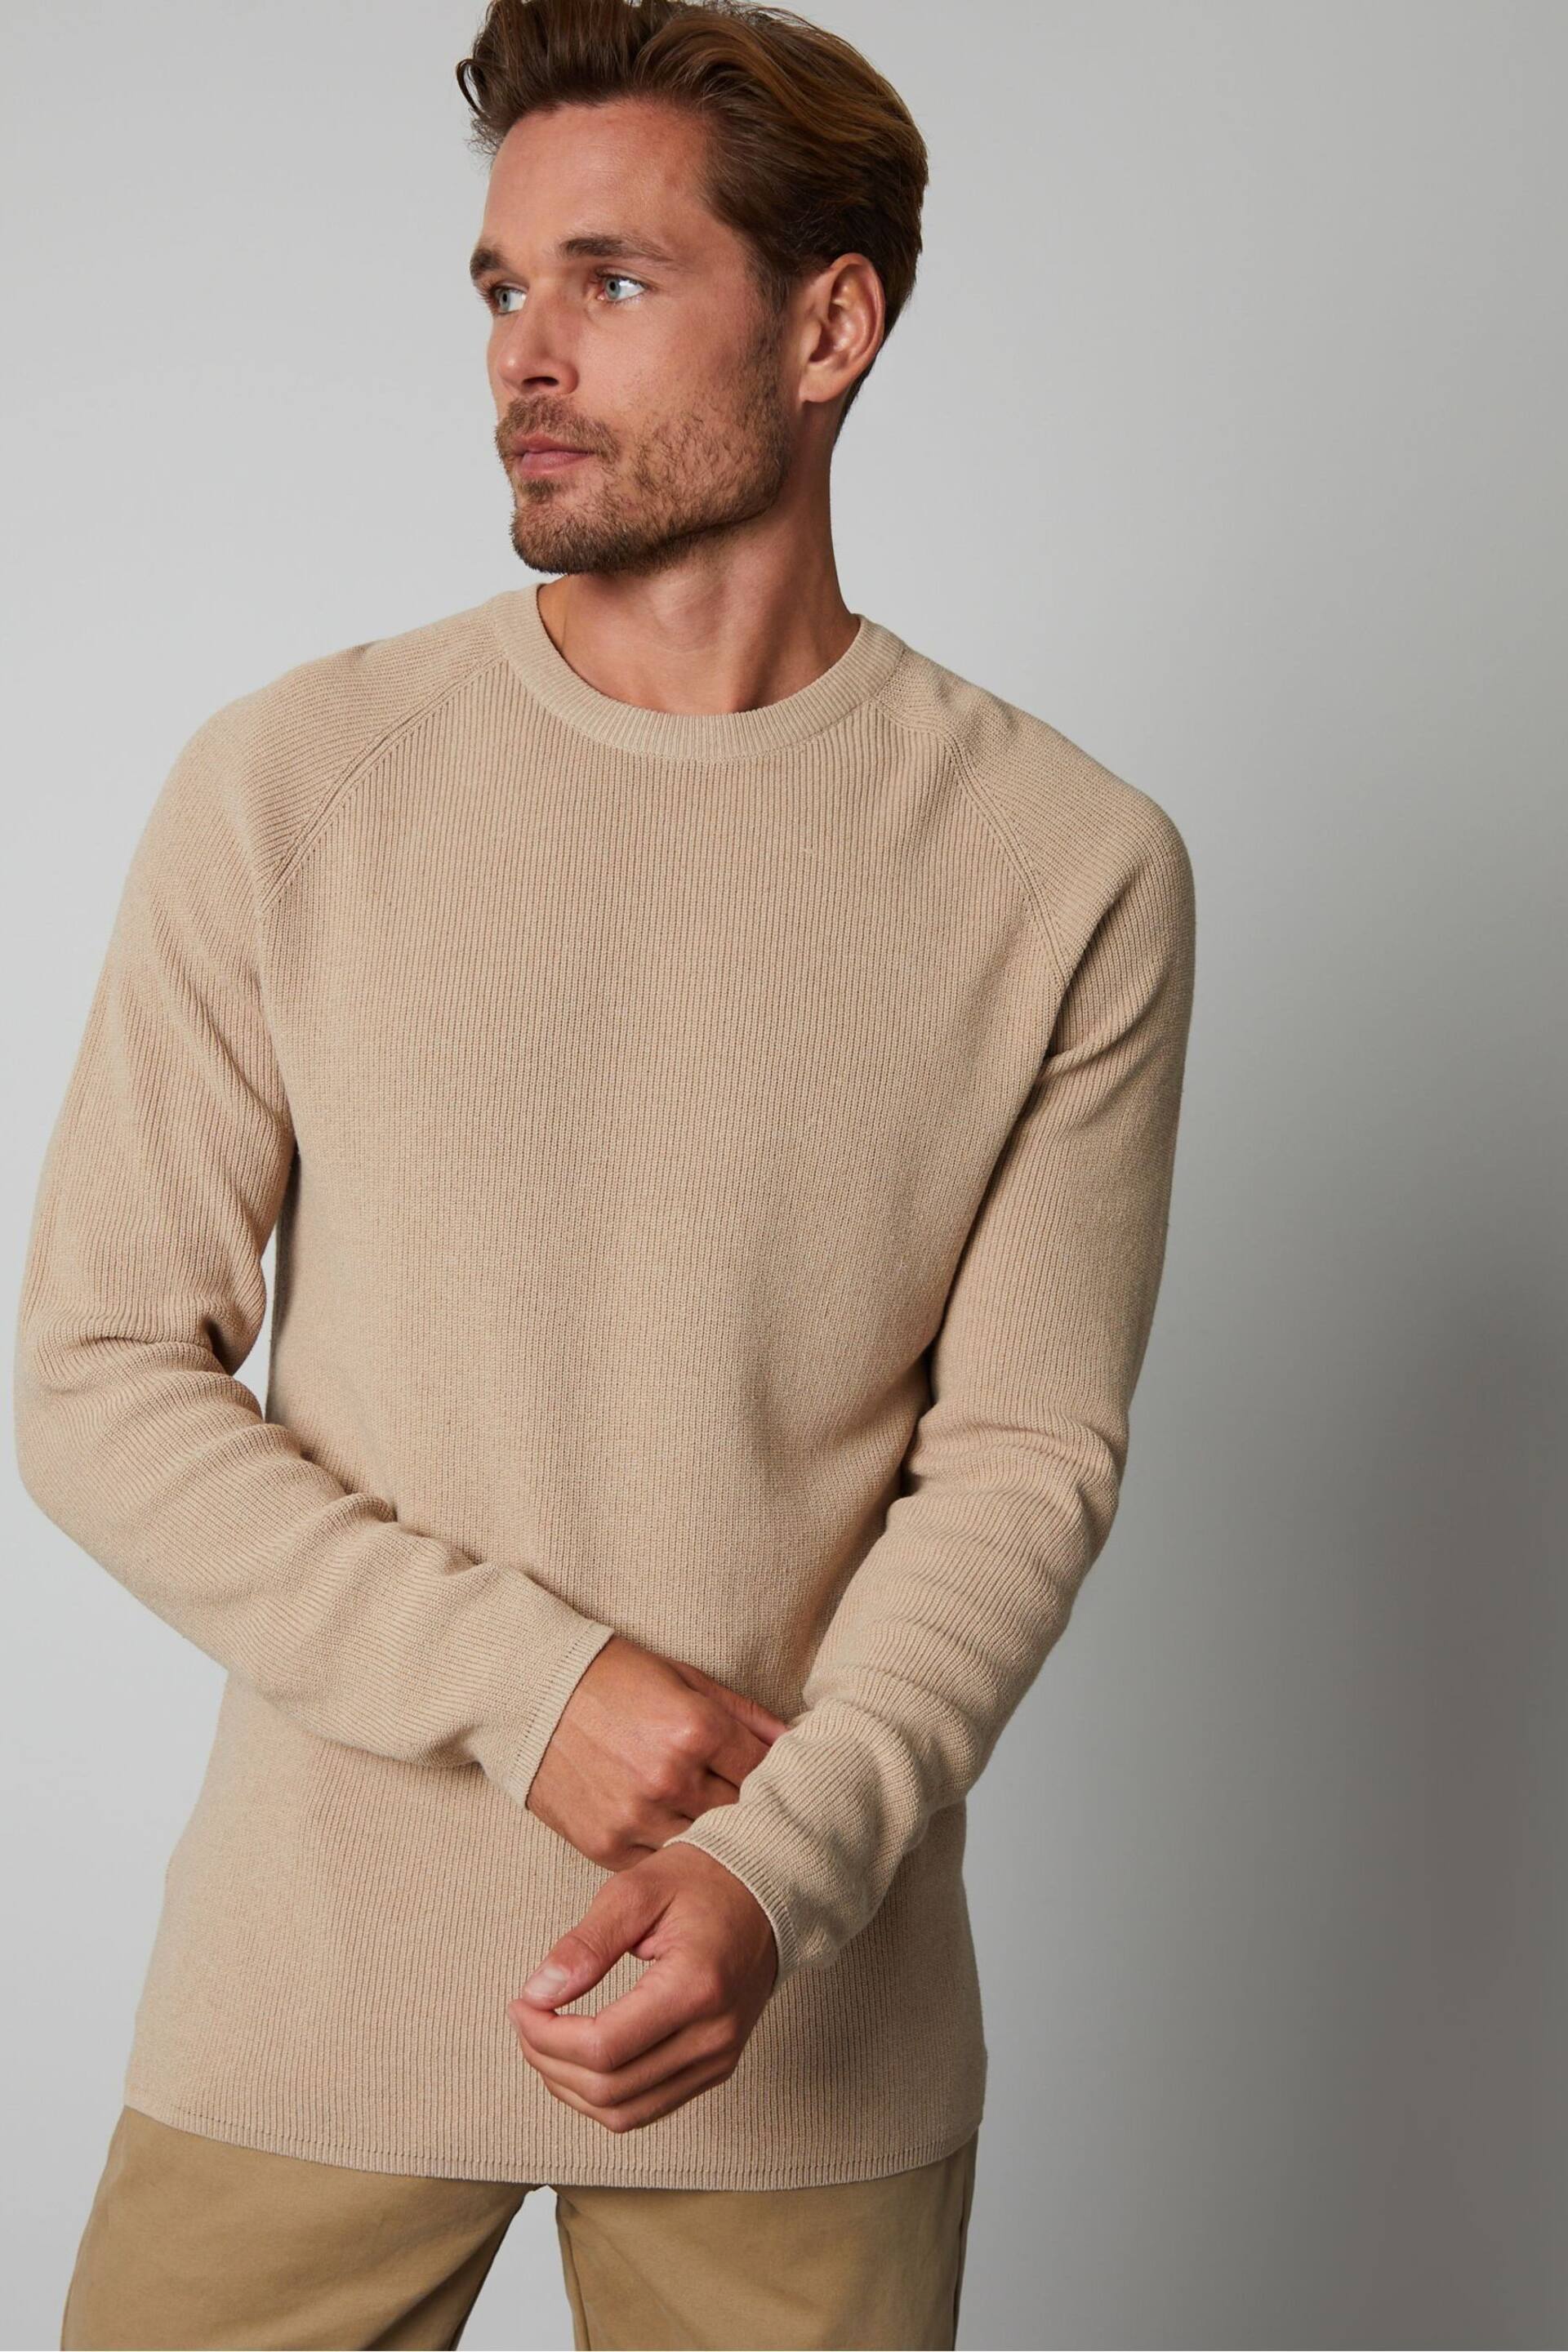 Threadbare Brown Crew Neck Knitted Jumper - Image 1 of 5